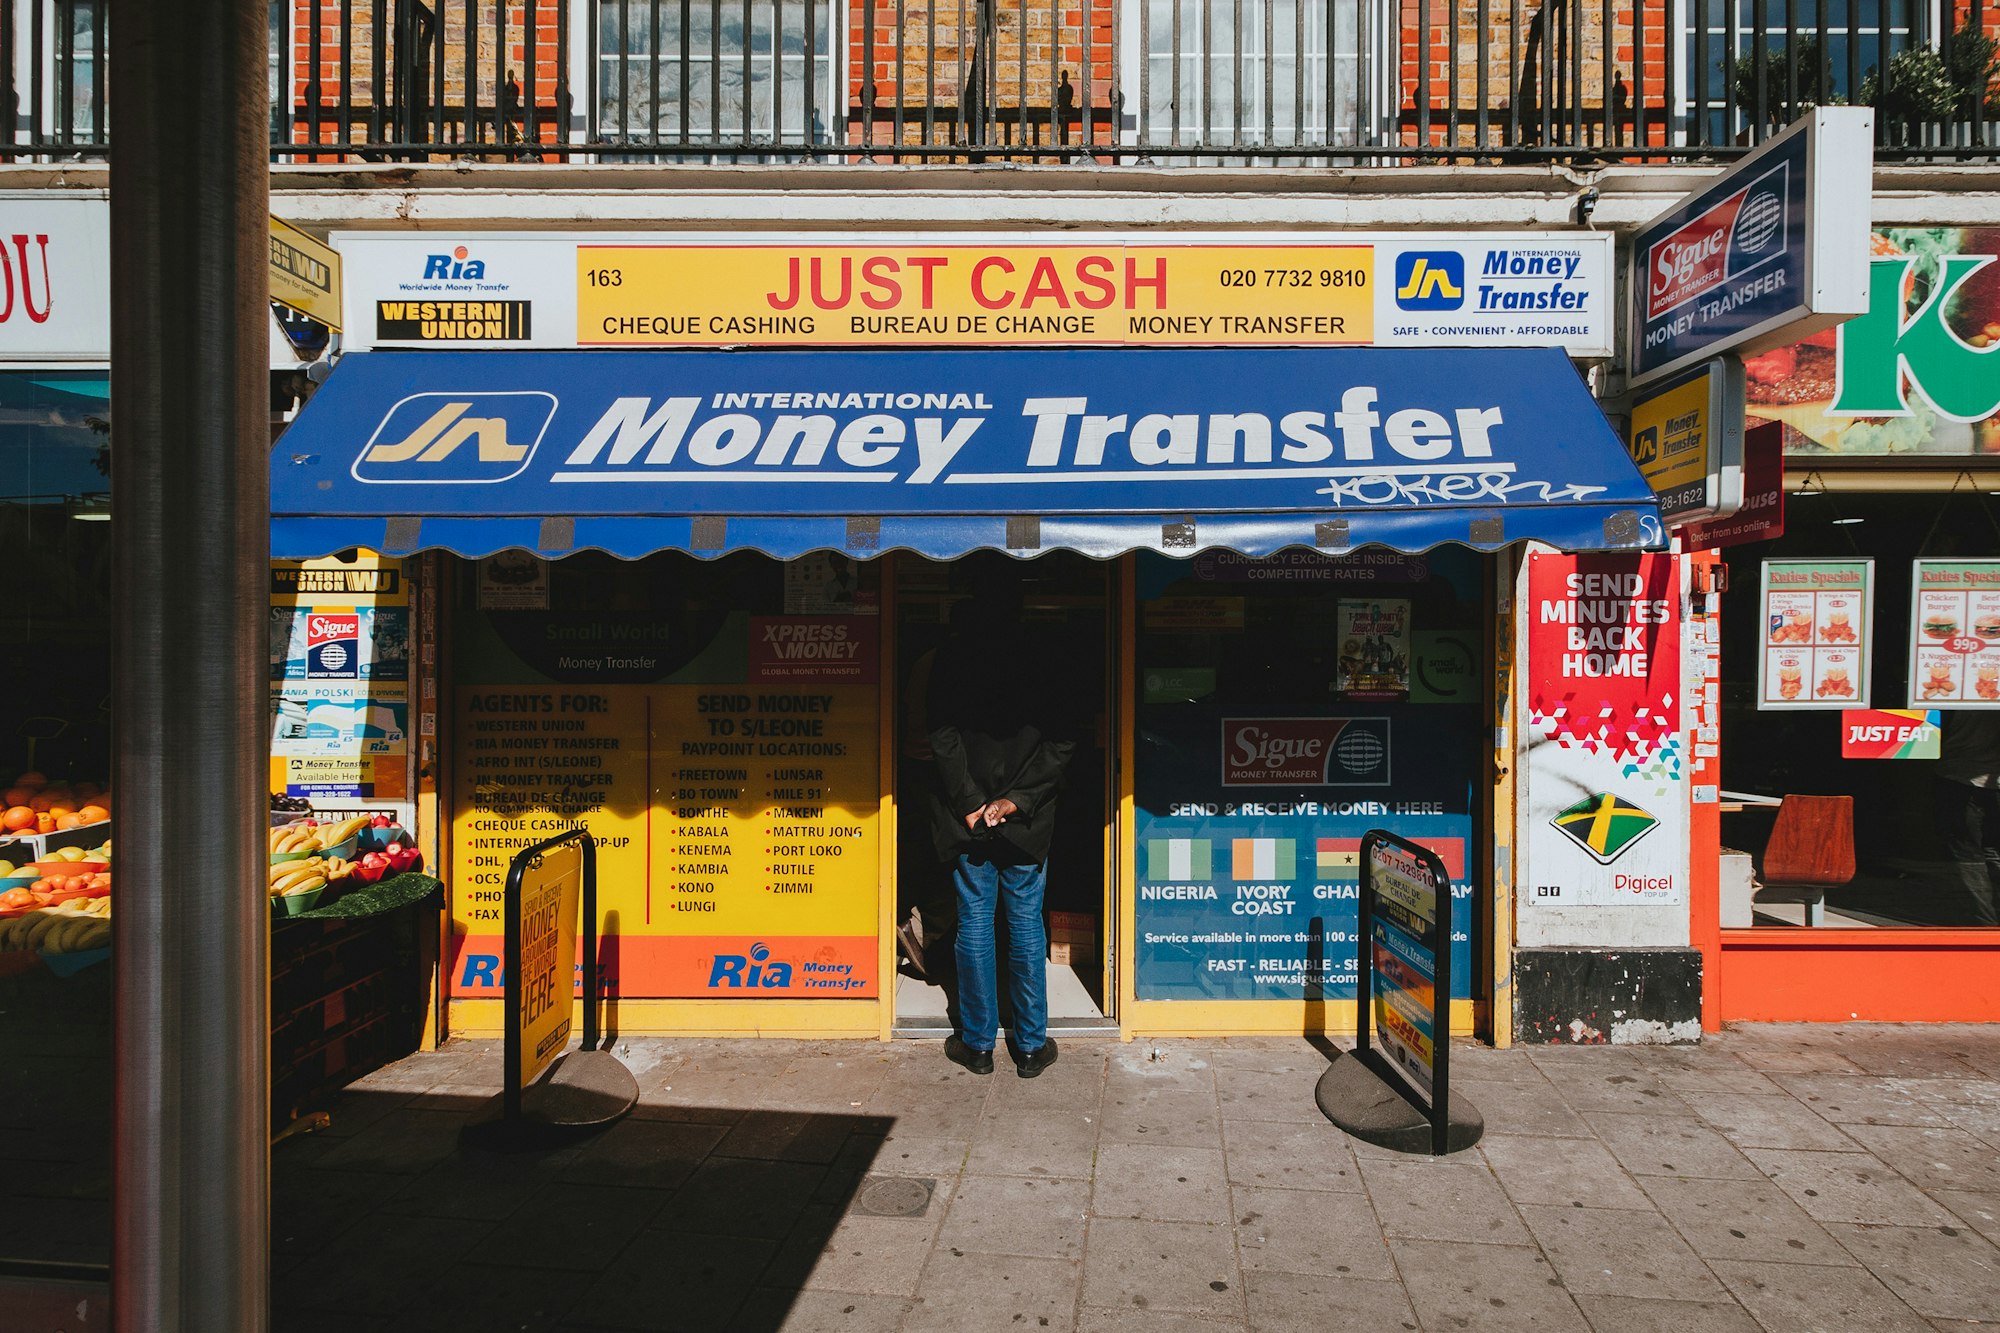 Street scene of a man waiting in line at a money transfer shop in London, notoriously dodgy places.